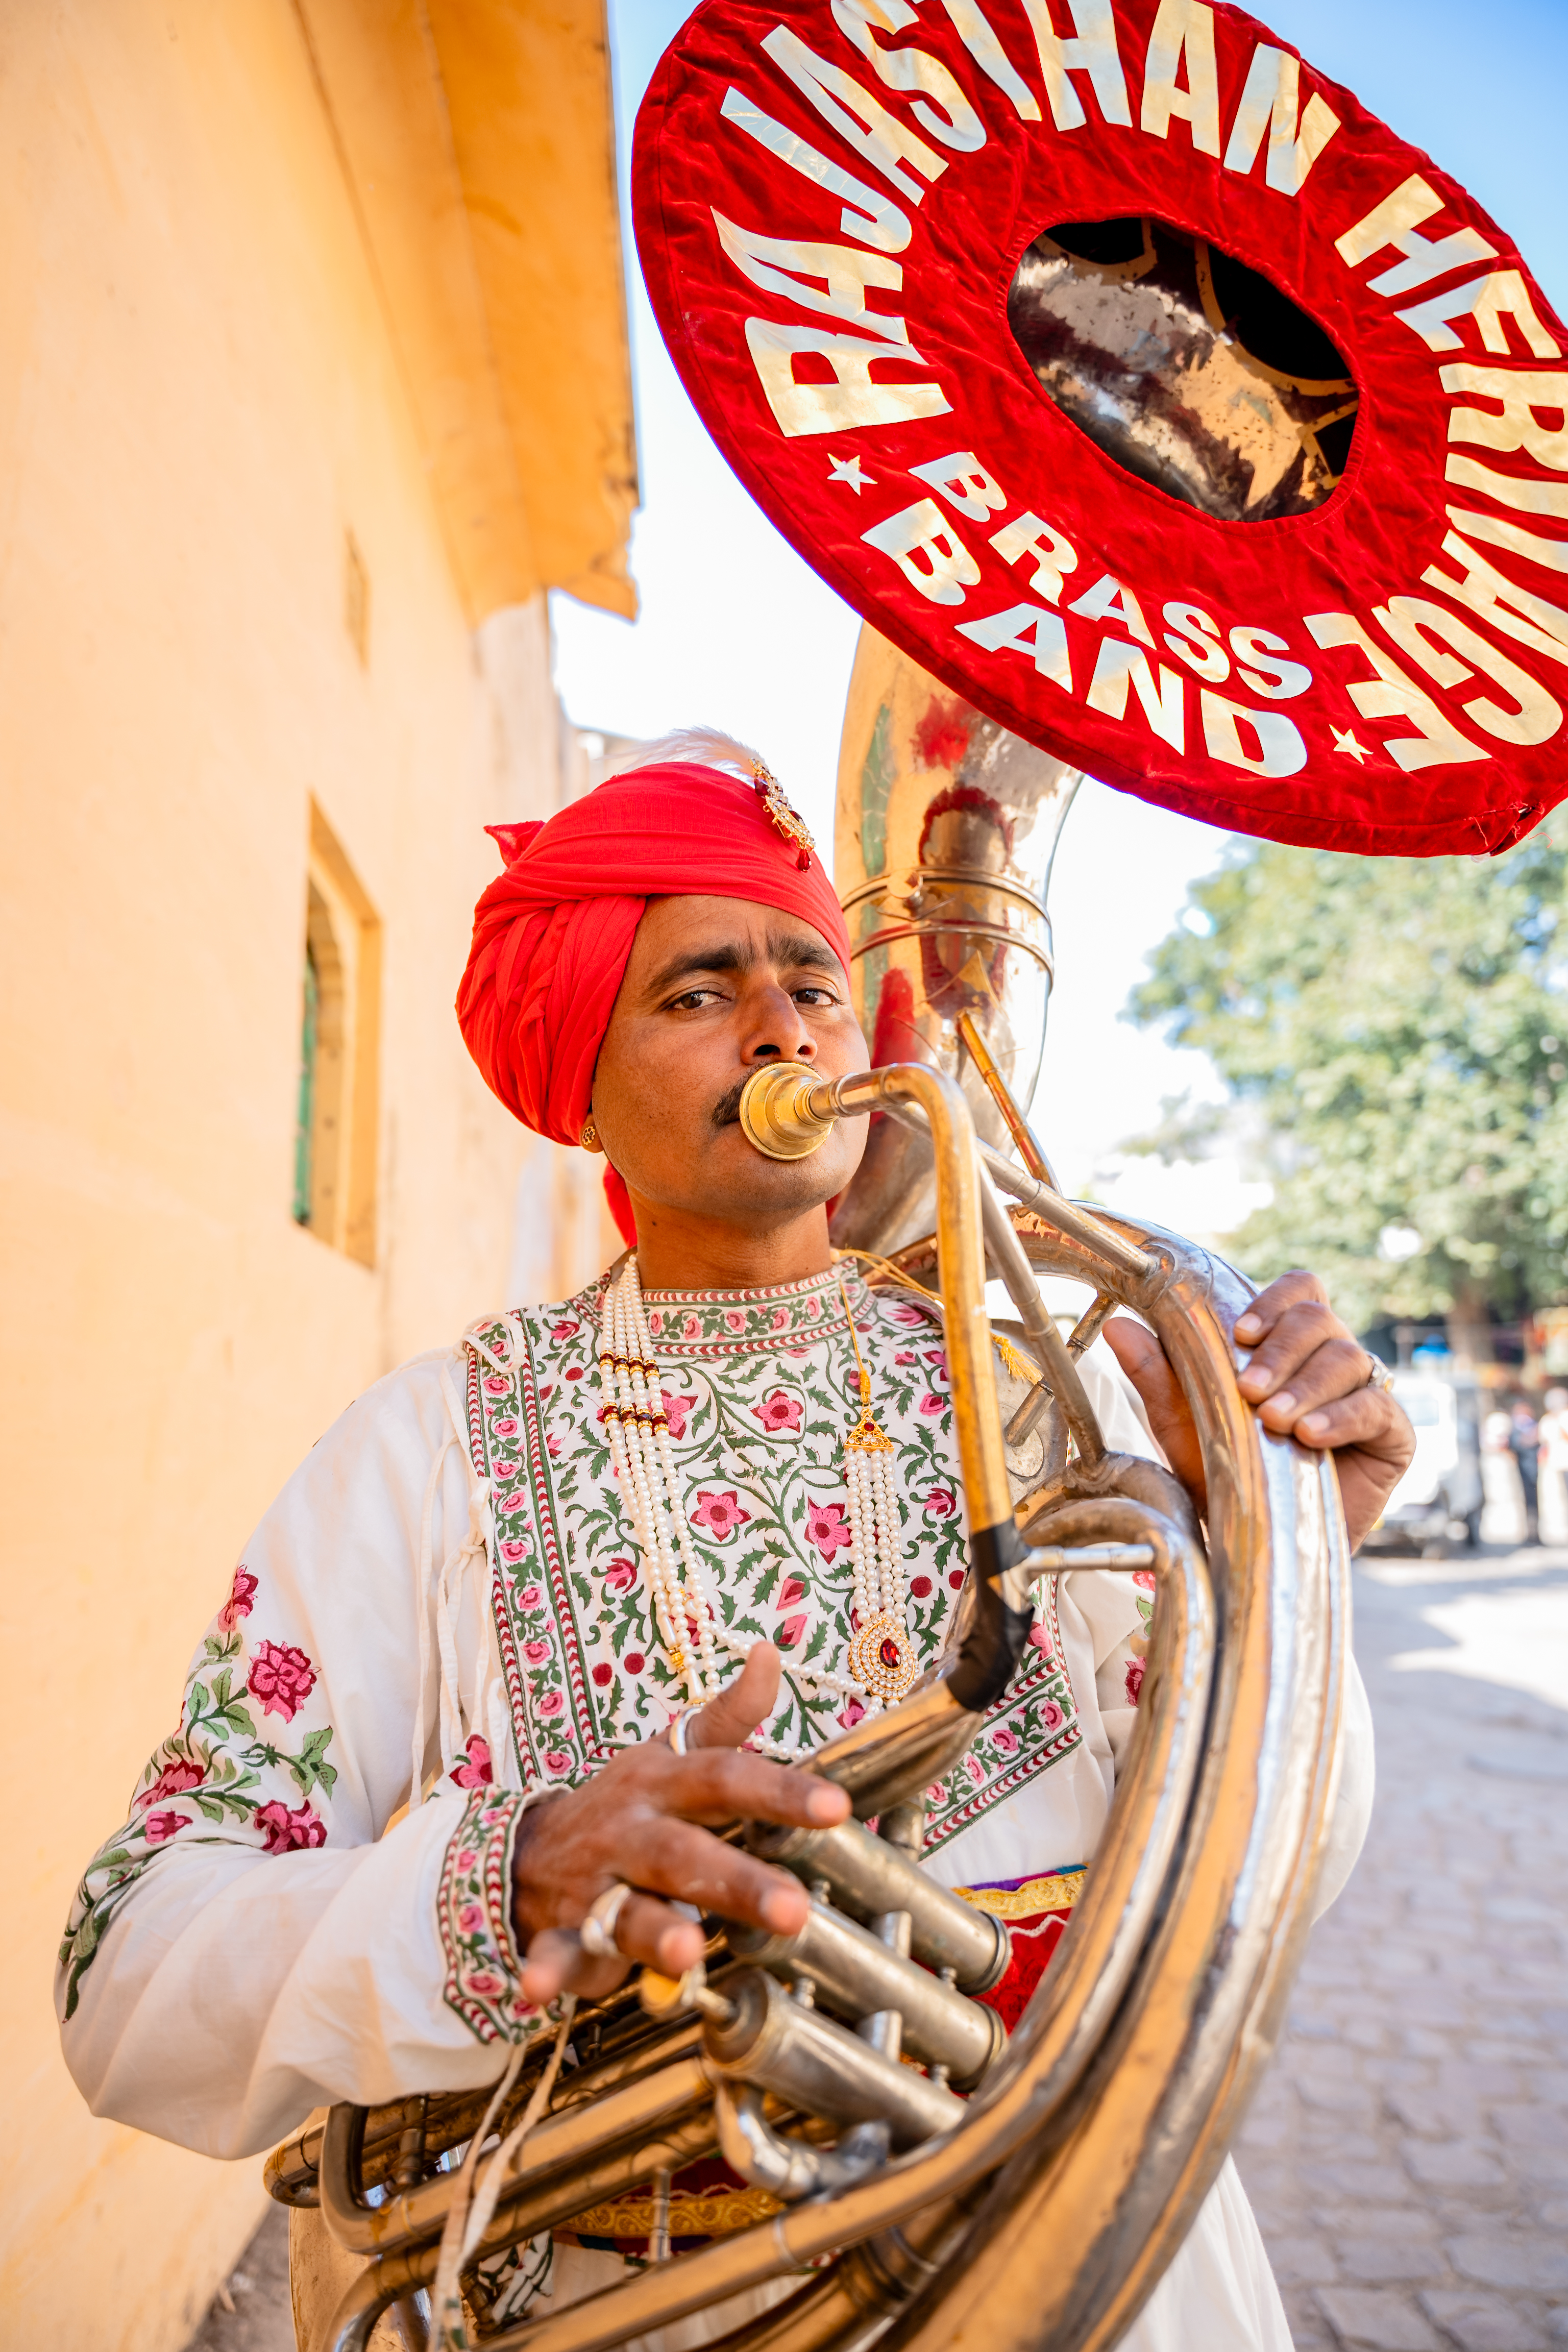 Rajasthan Heritage Brass Band - Access All Areas : Access All Areas